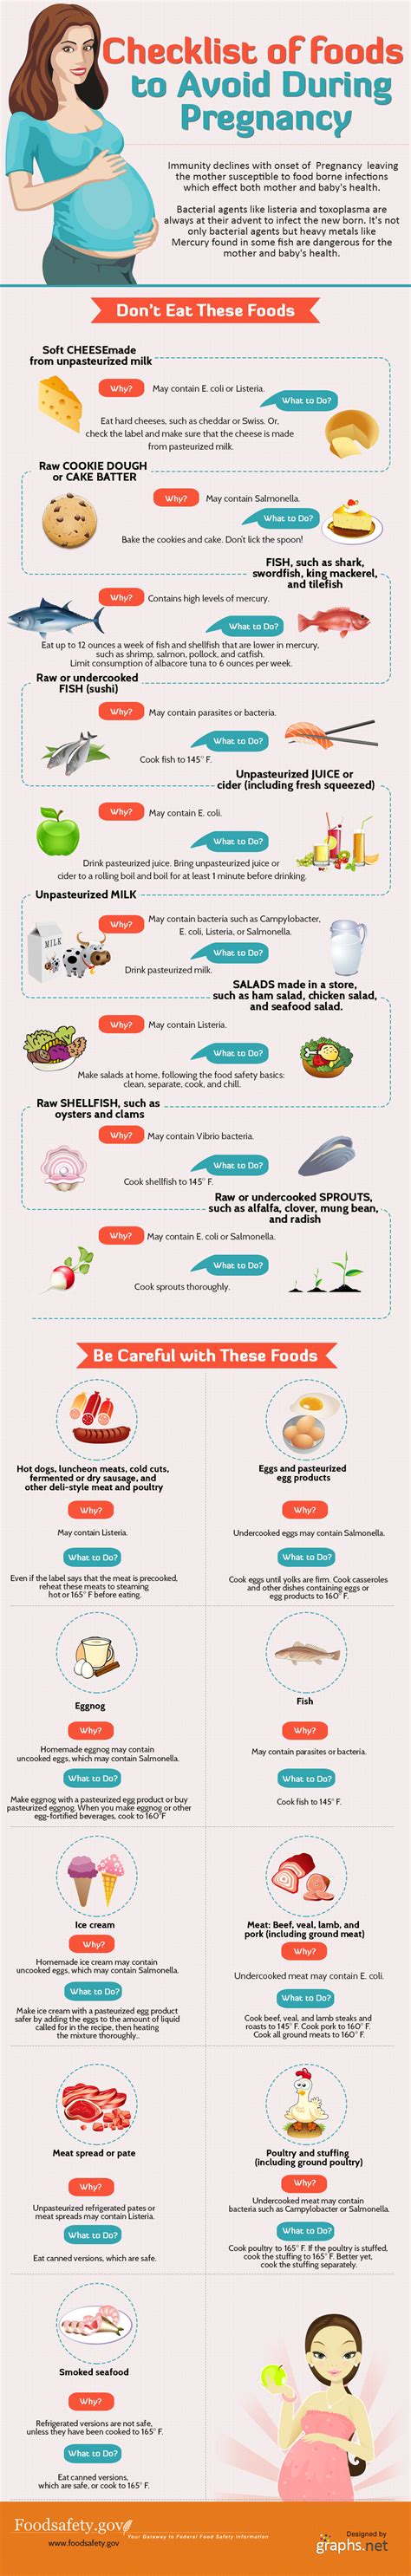 The rules on foods to avoid while pregnant can seem confusing, but there are just a few important takeaways to keep you and your baby safe. Foods To Avoid During Pregnancy (Infographic) | UCollect ...